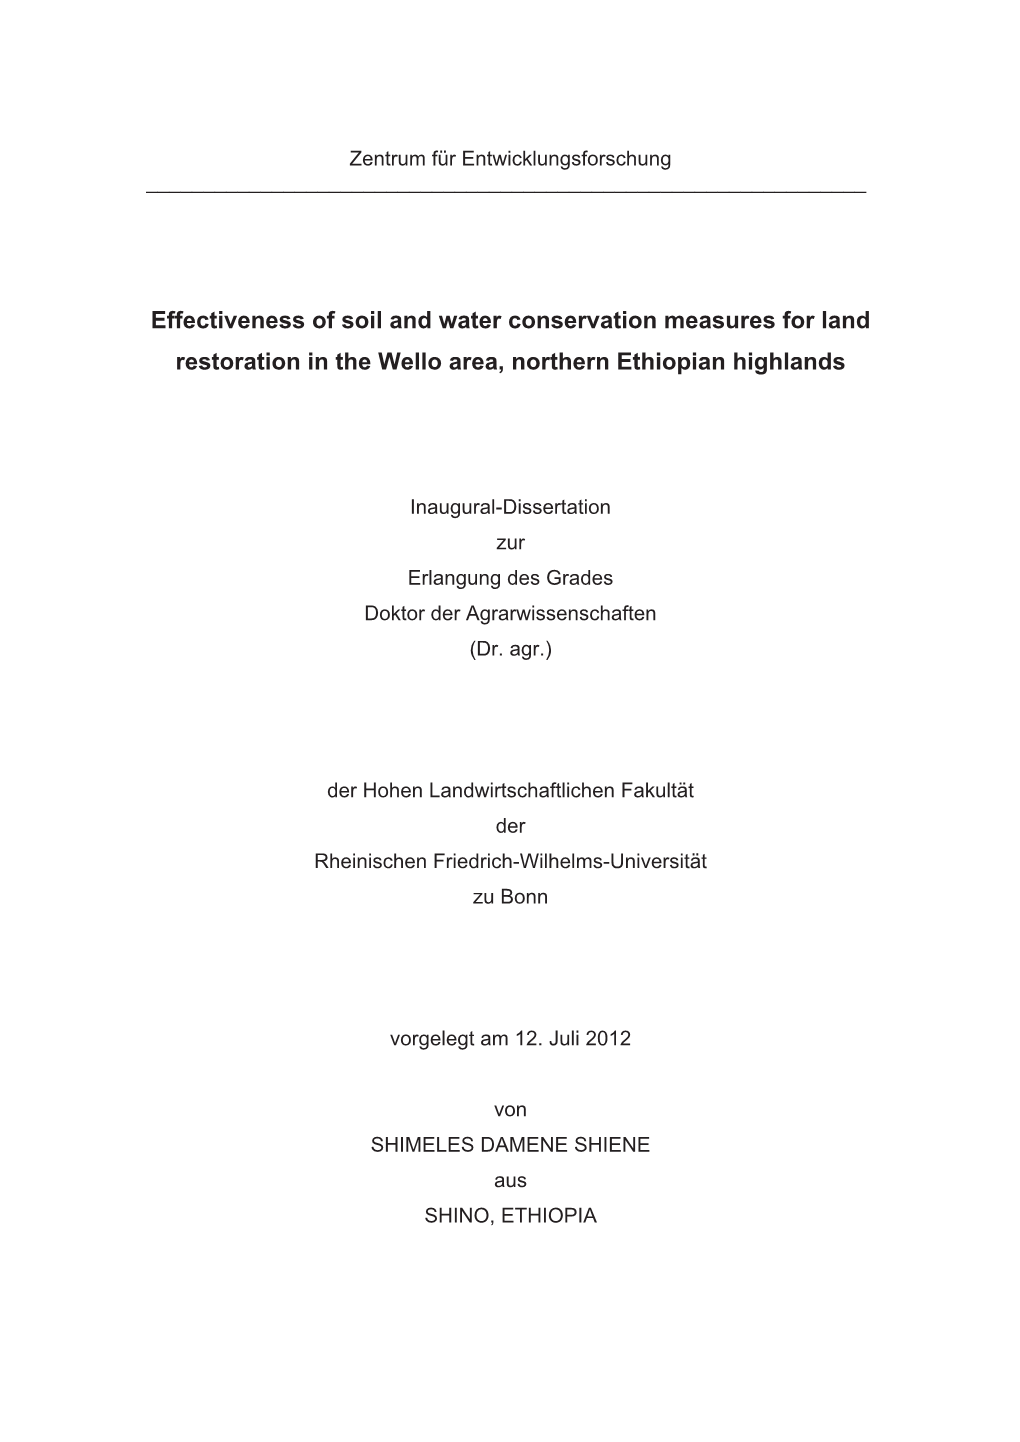 Effectiveness of Soil and Water Conservation Measures for Land Restoration in the Wello Area, Northern Ethiopian Highlands